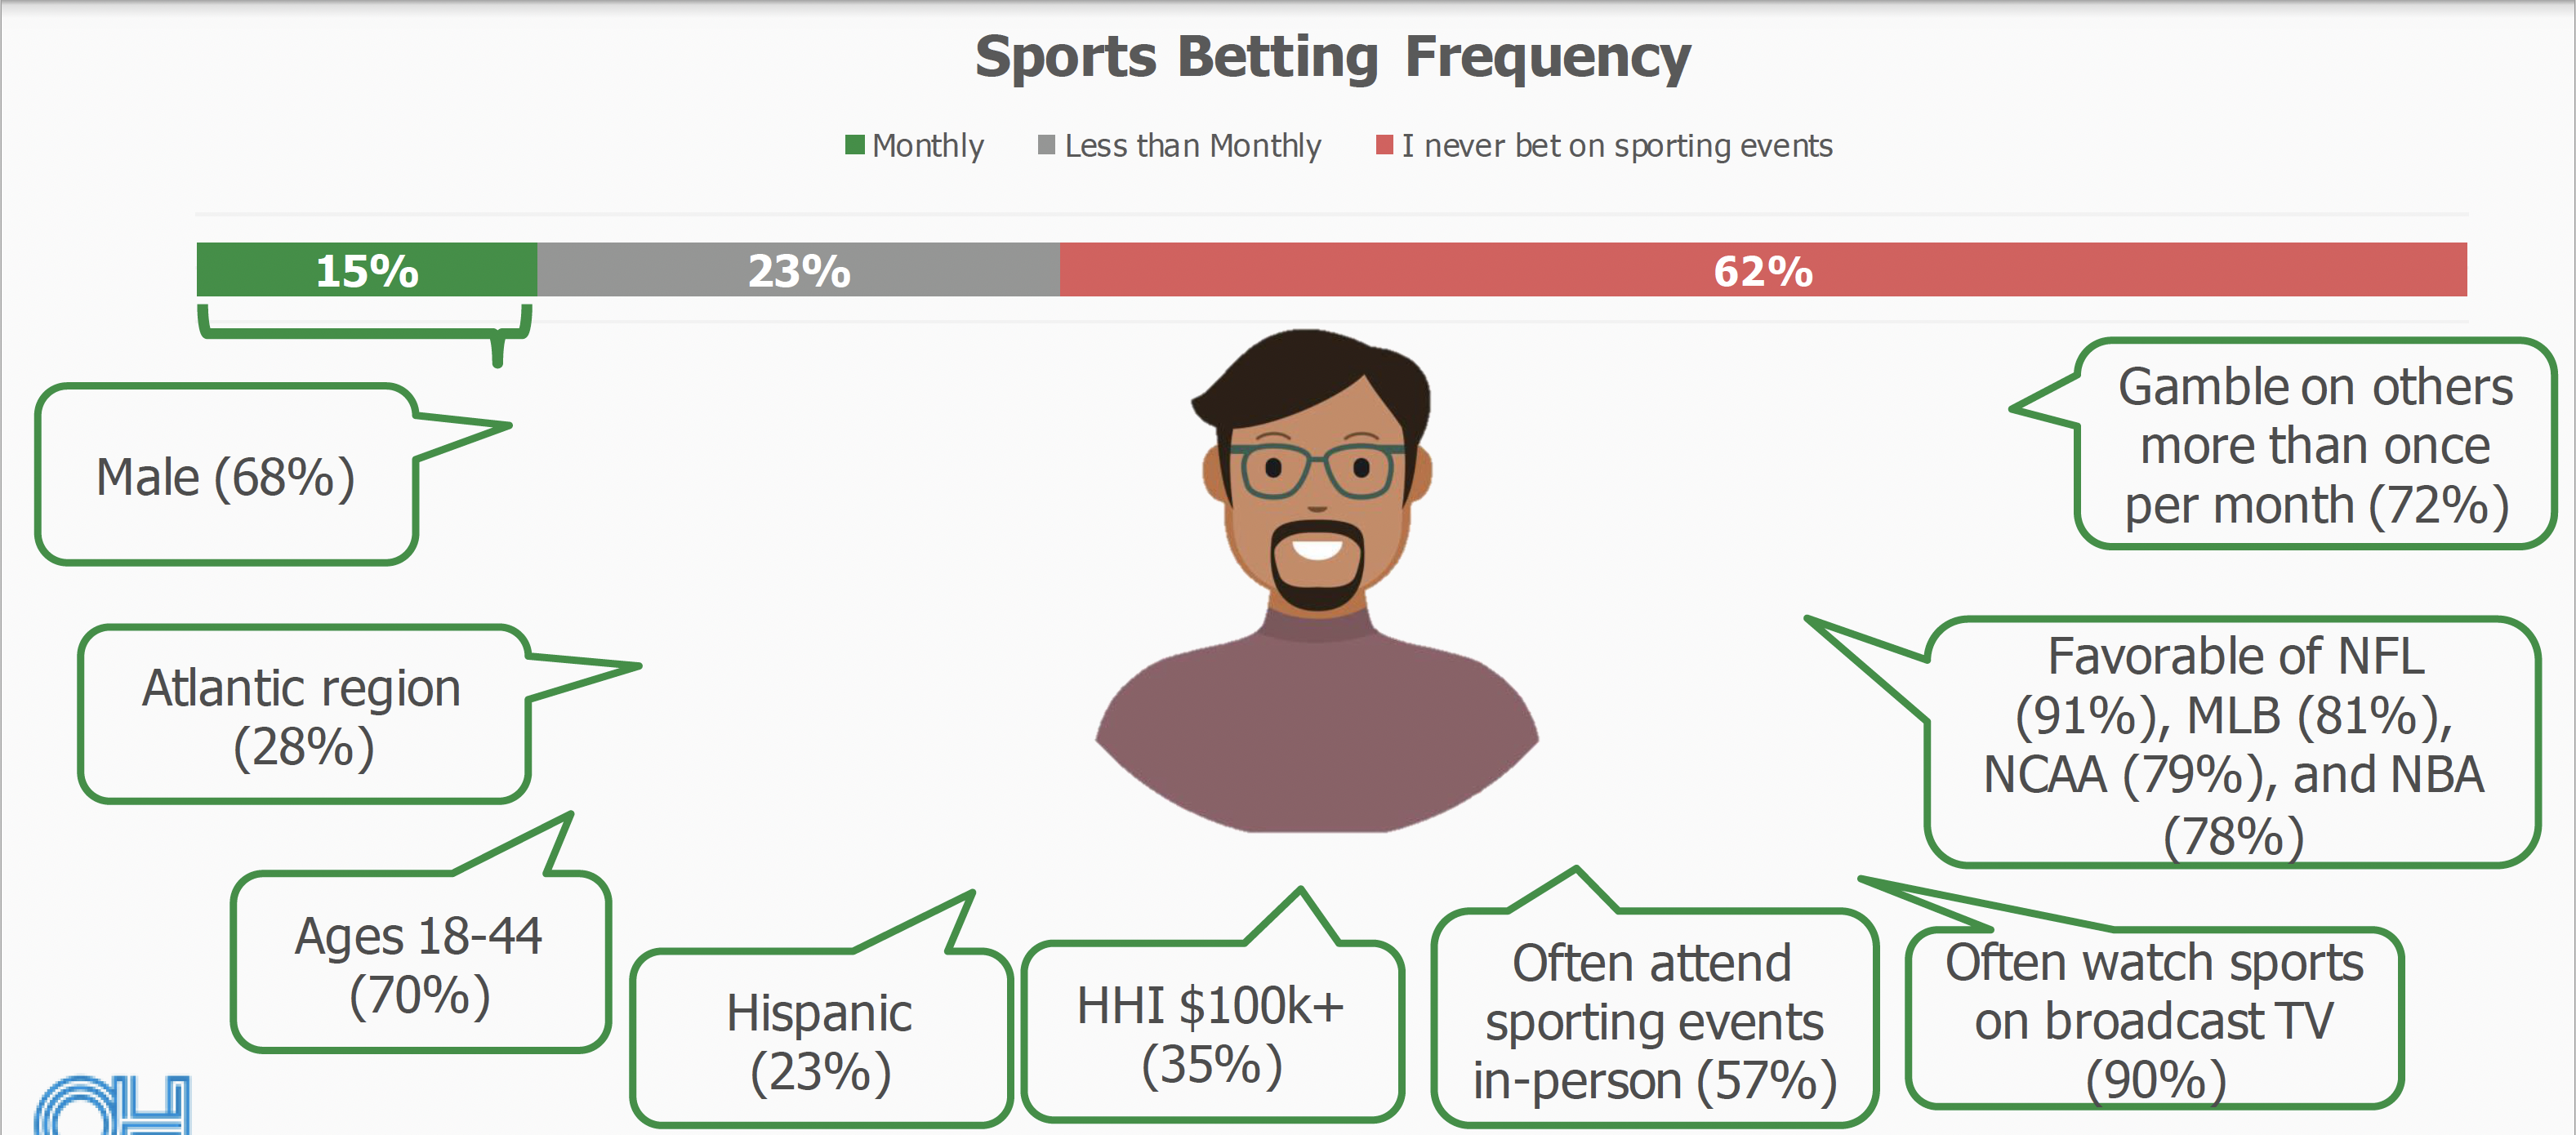 Who participates in sports betting?